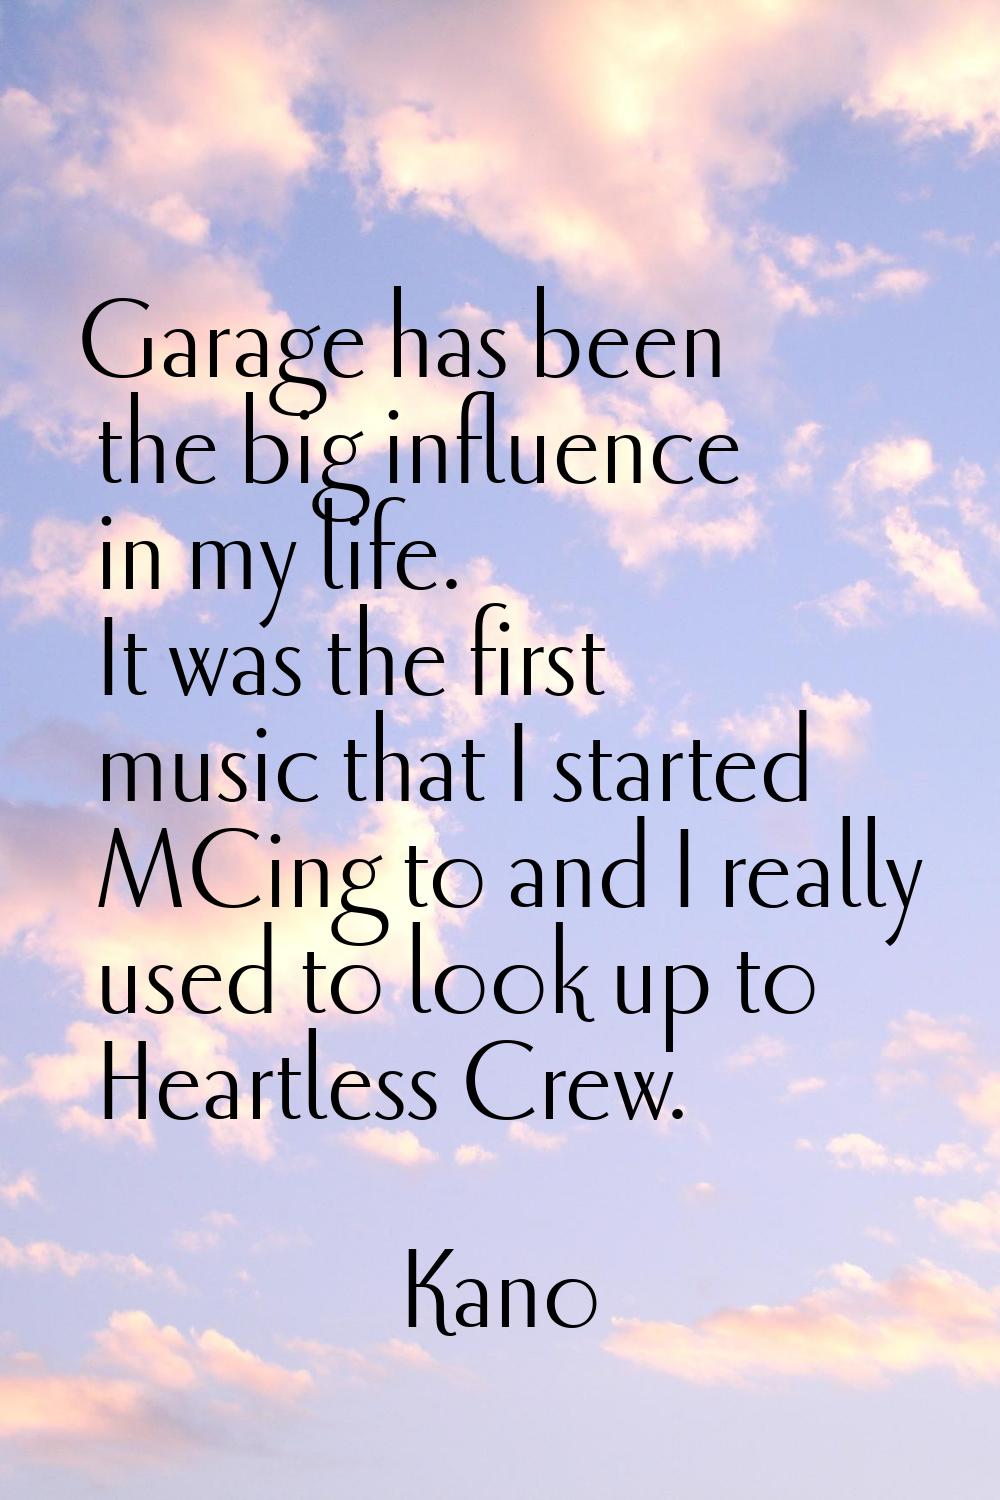 Garage has been the big influence in my life. It was the first music that I started MCing to and I 